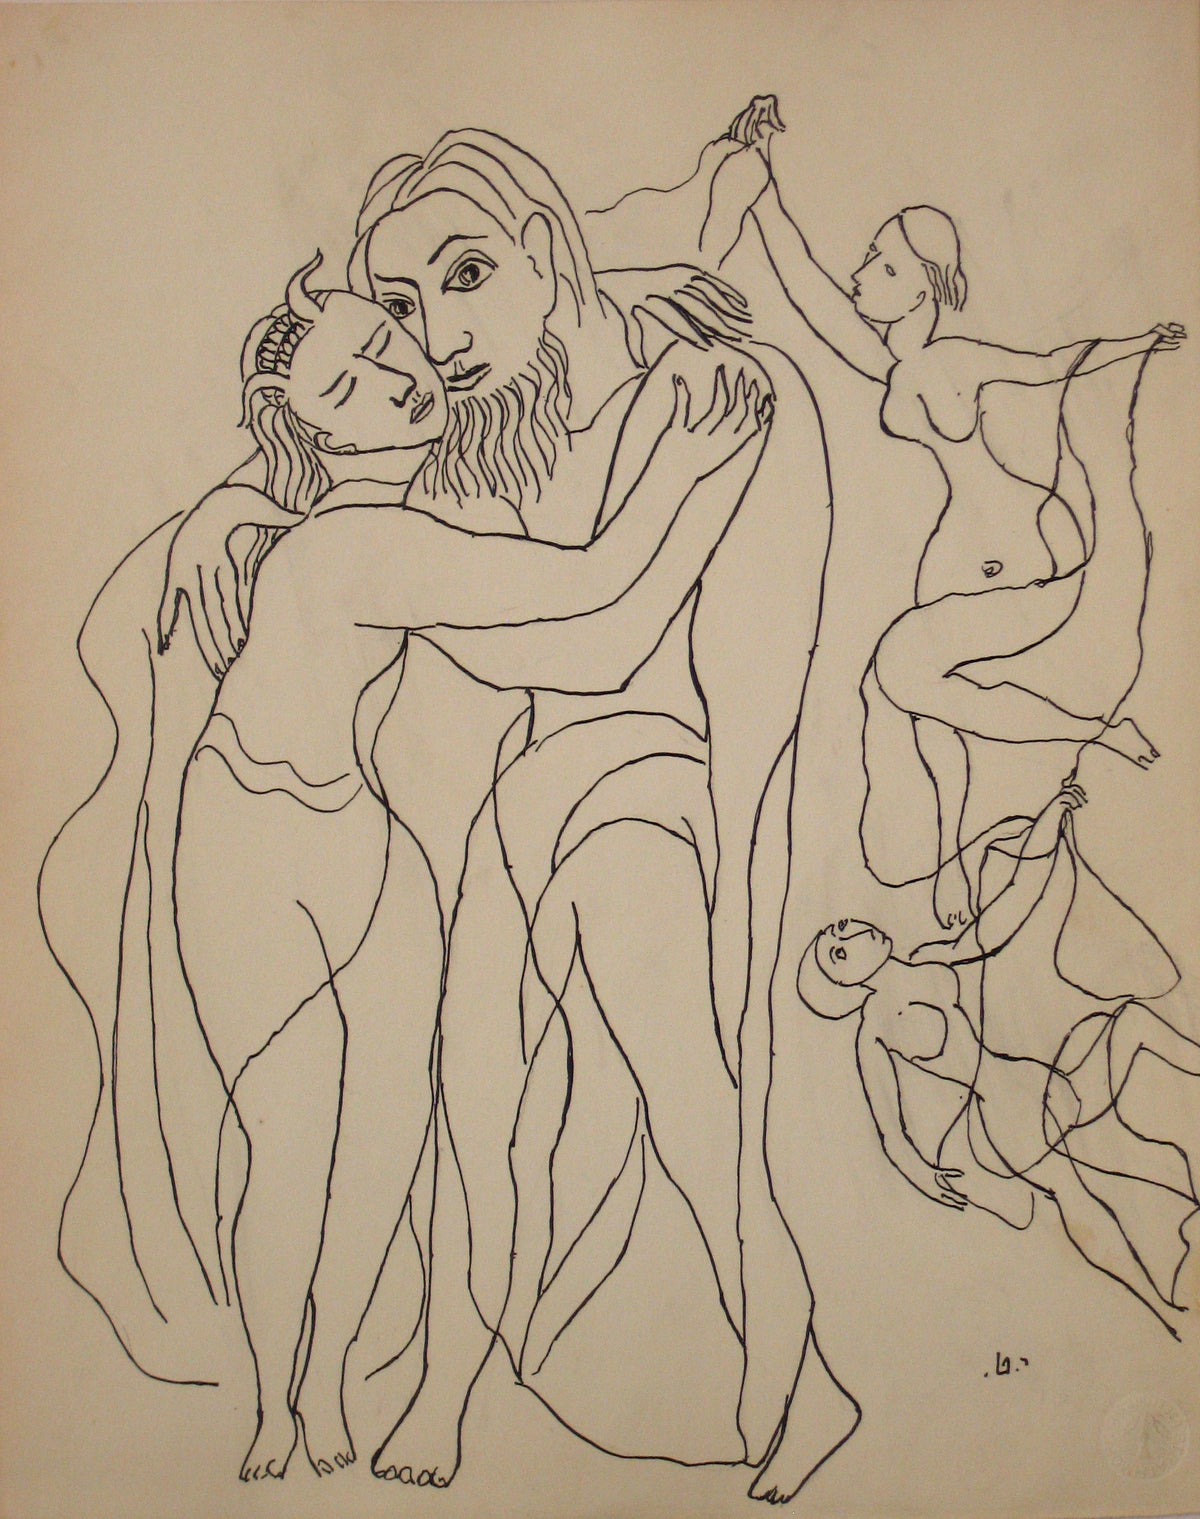 Expressionist Embrace &lt;br&gt;Early to Mid 20th Century Ink on Paper &lt;br&gt;&lt;br&gt;#14204